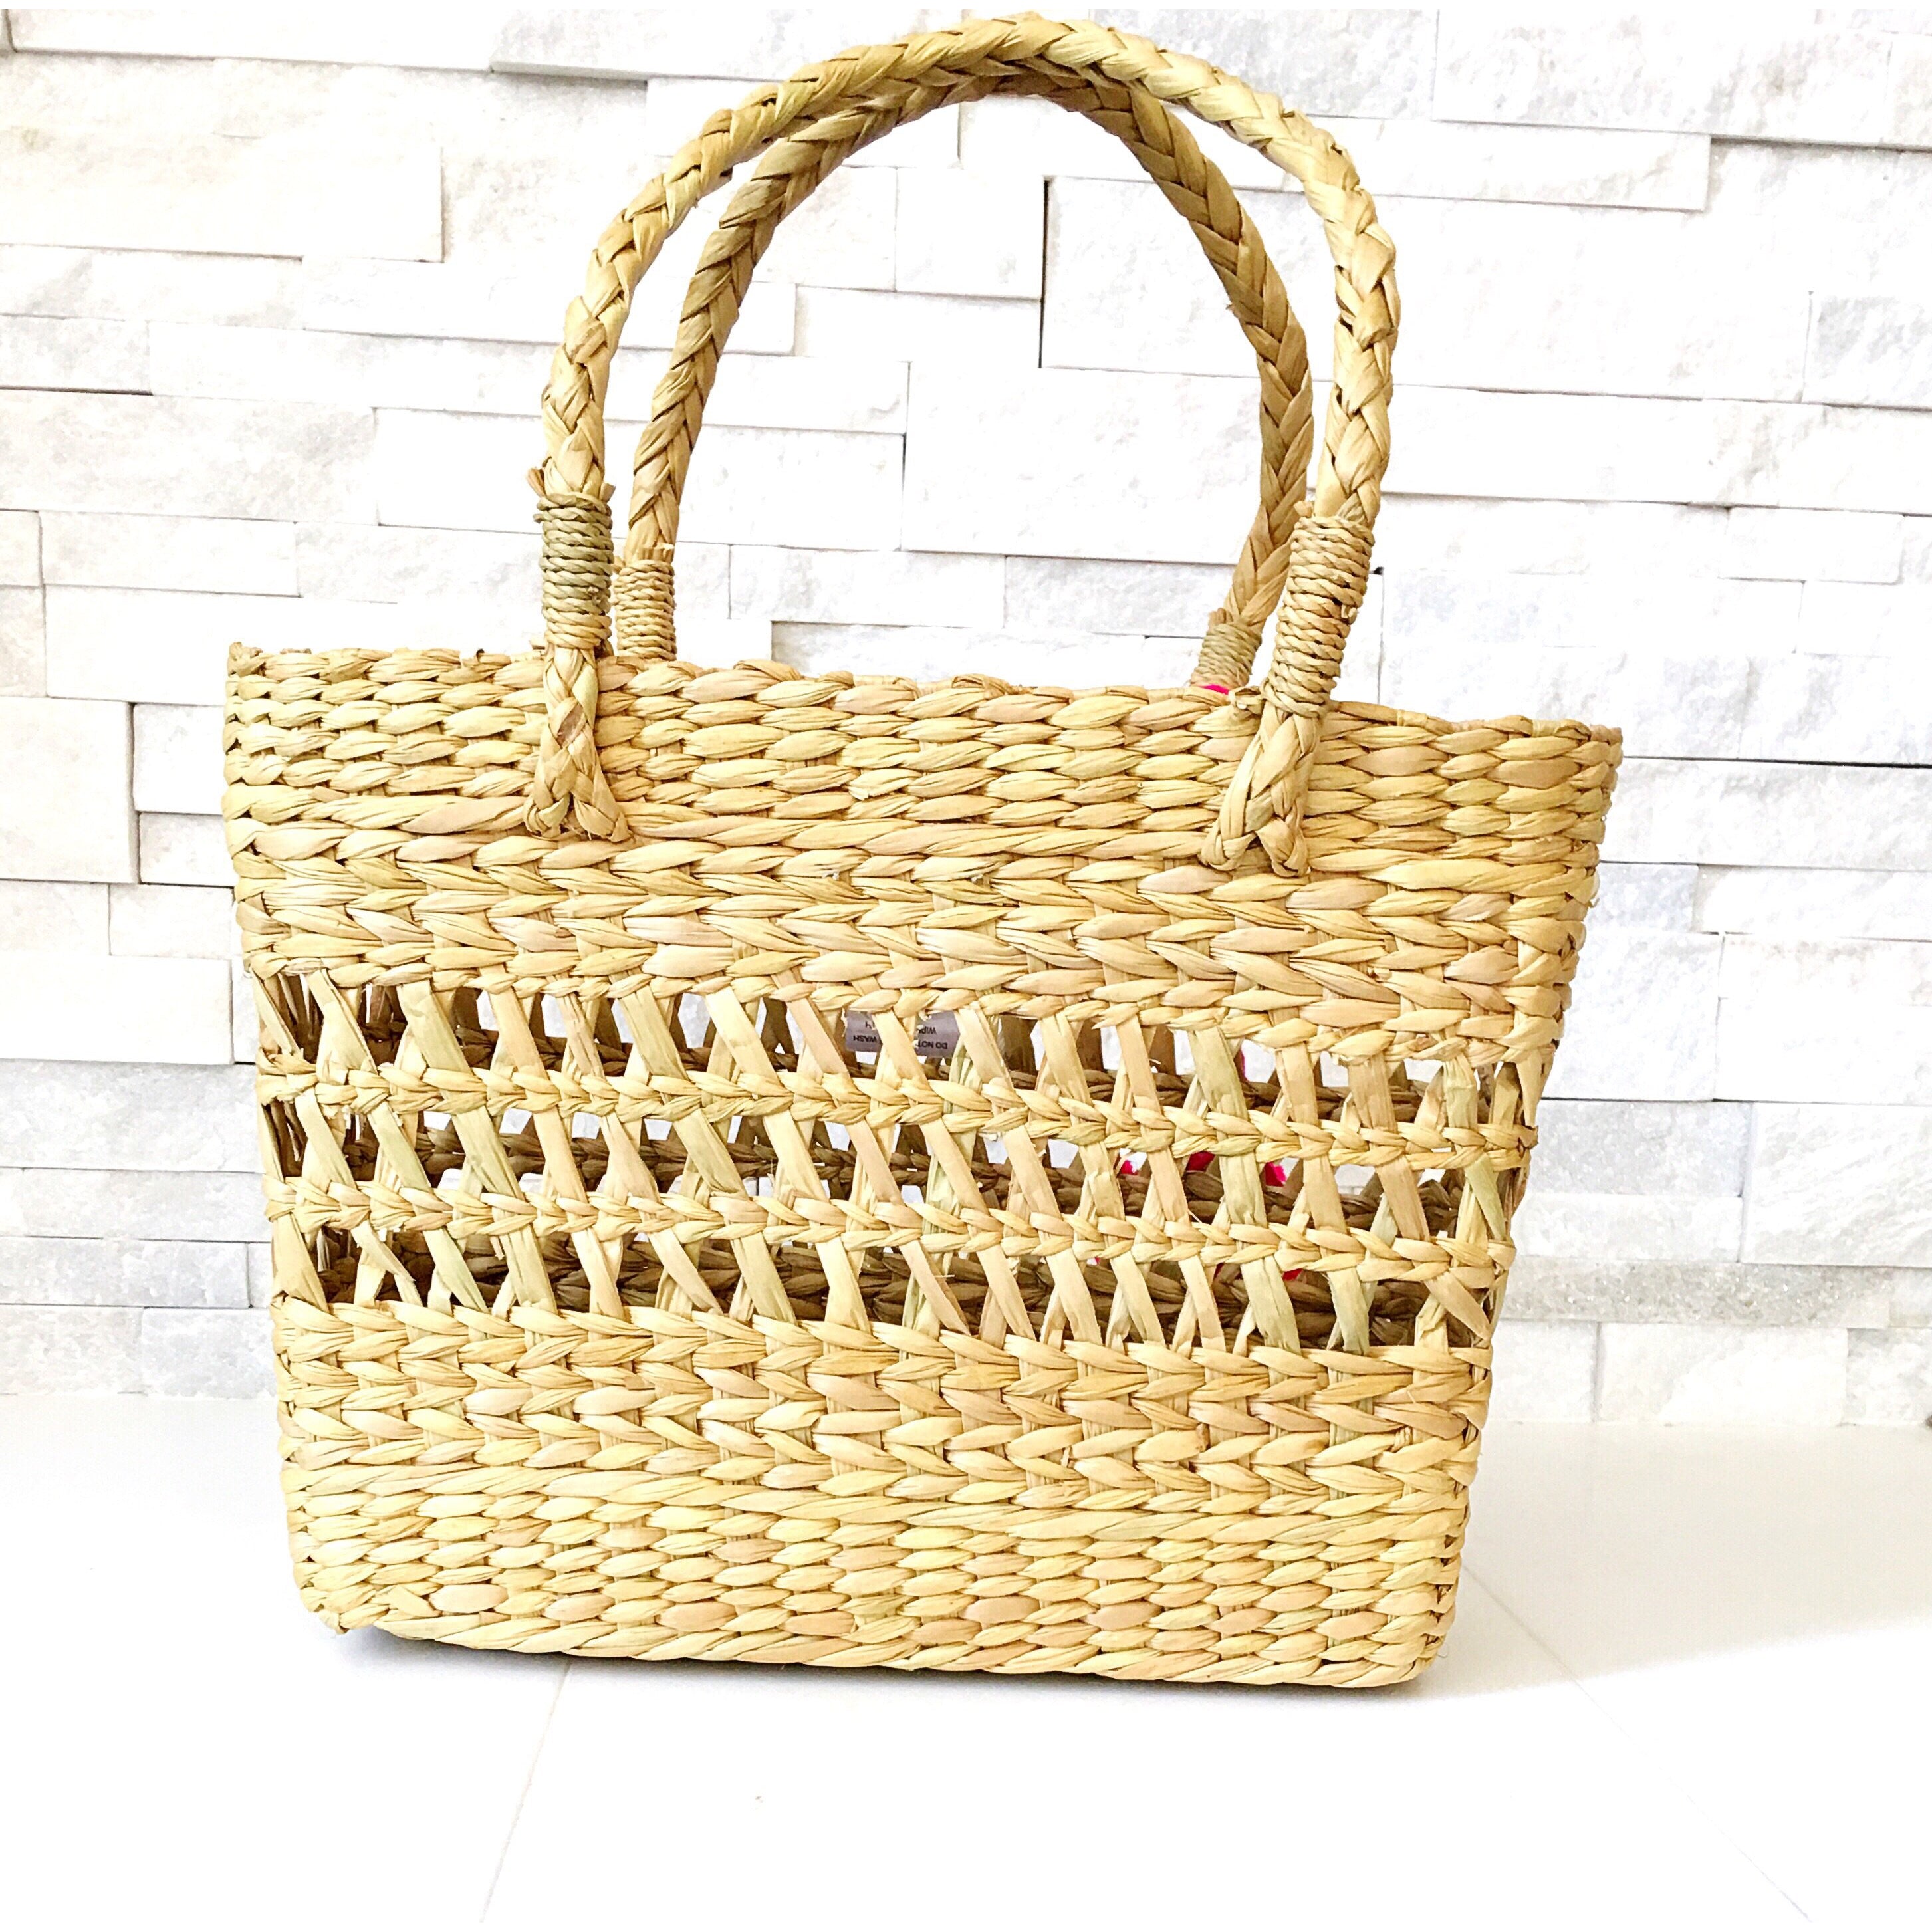 Sale ! Savannah Tote by Lovestitch - Glamco Boutique 